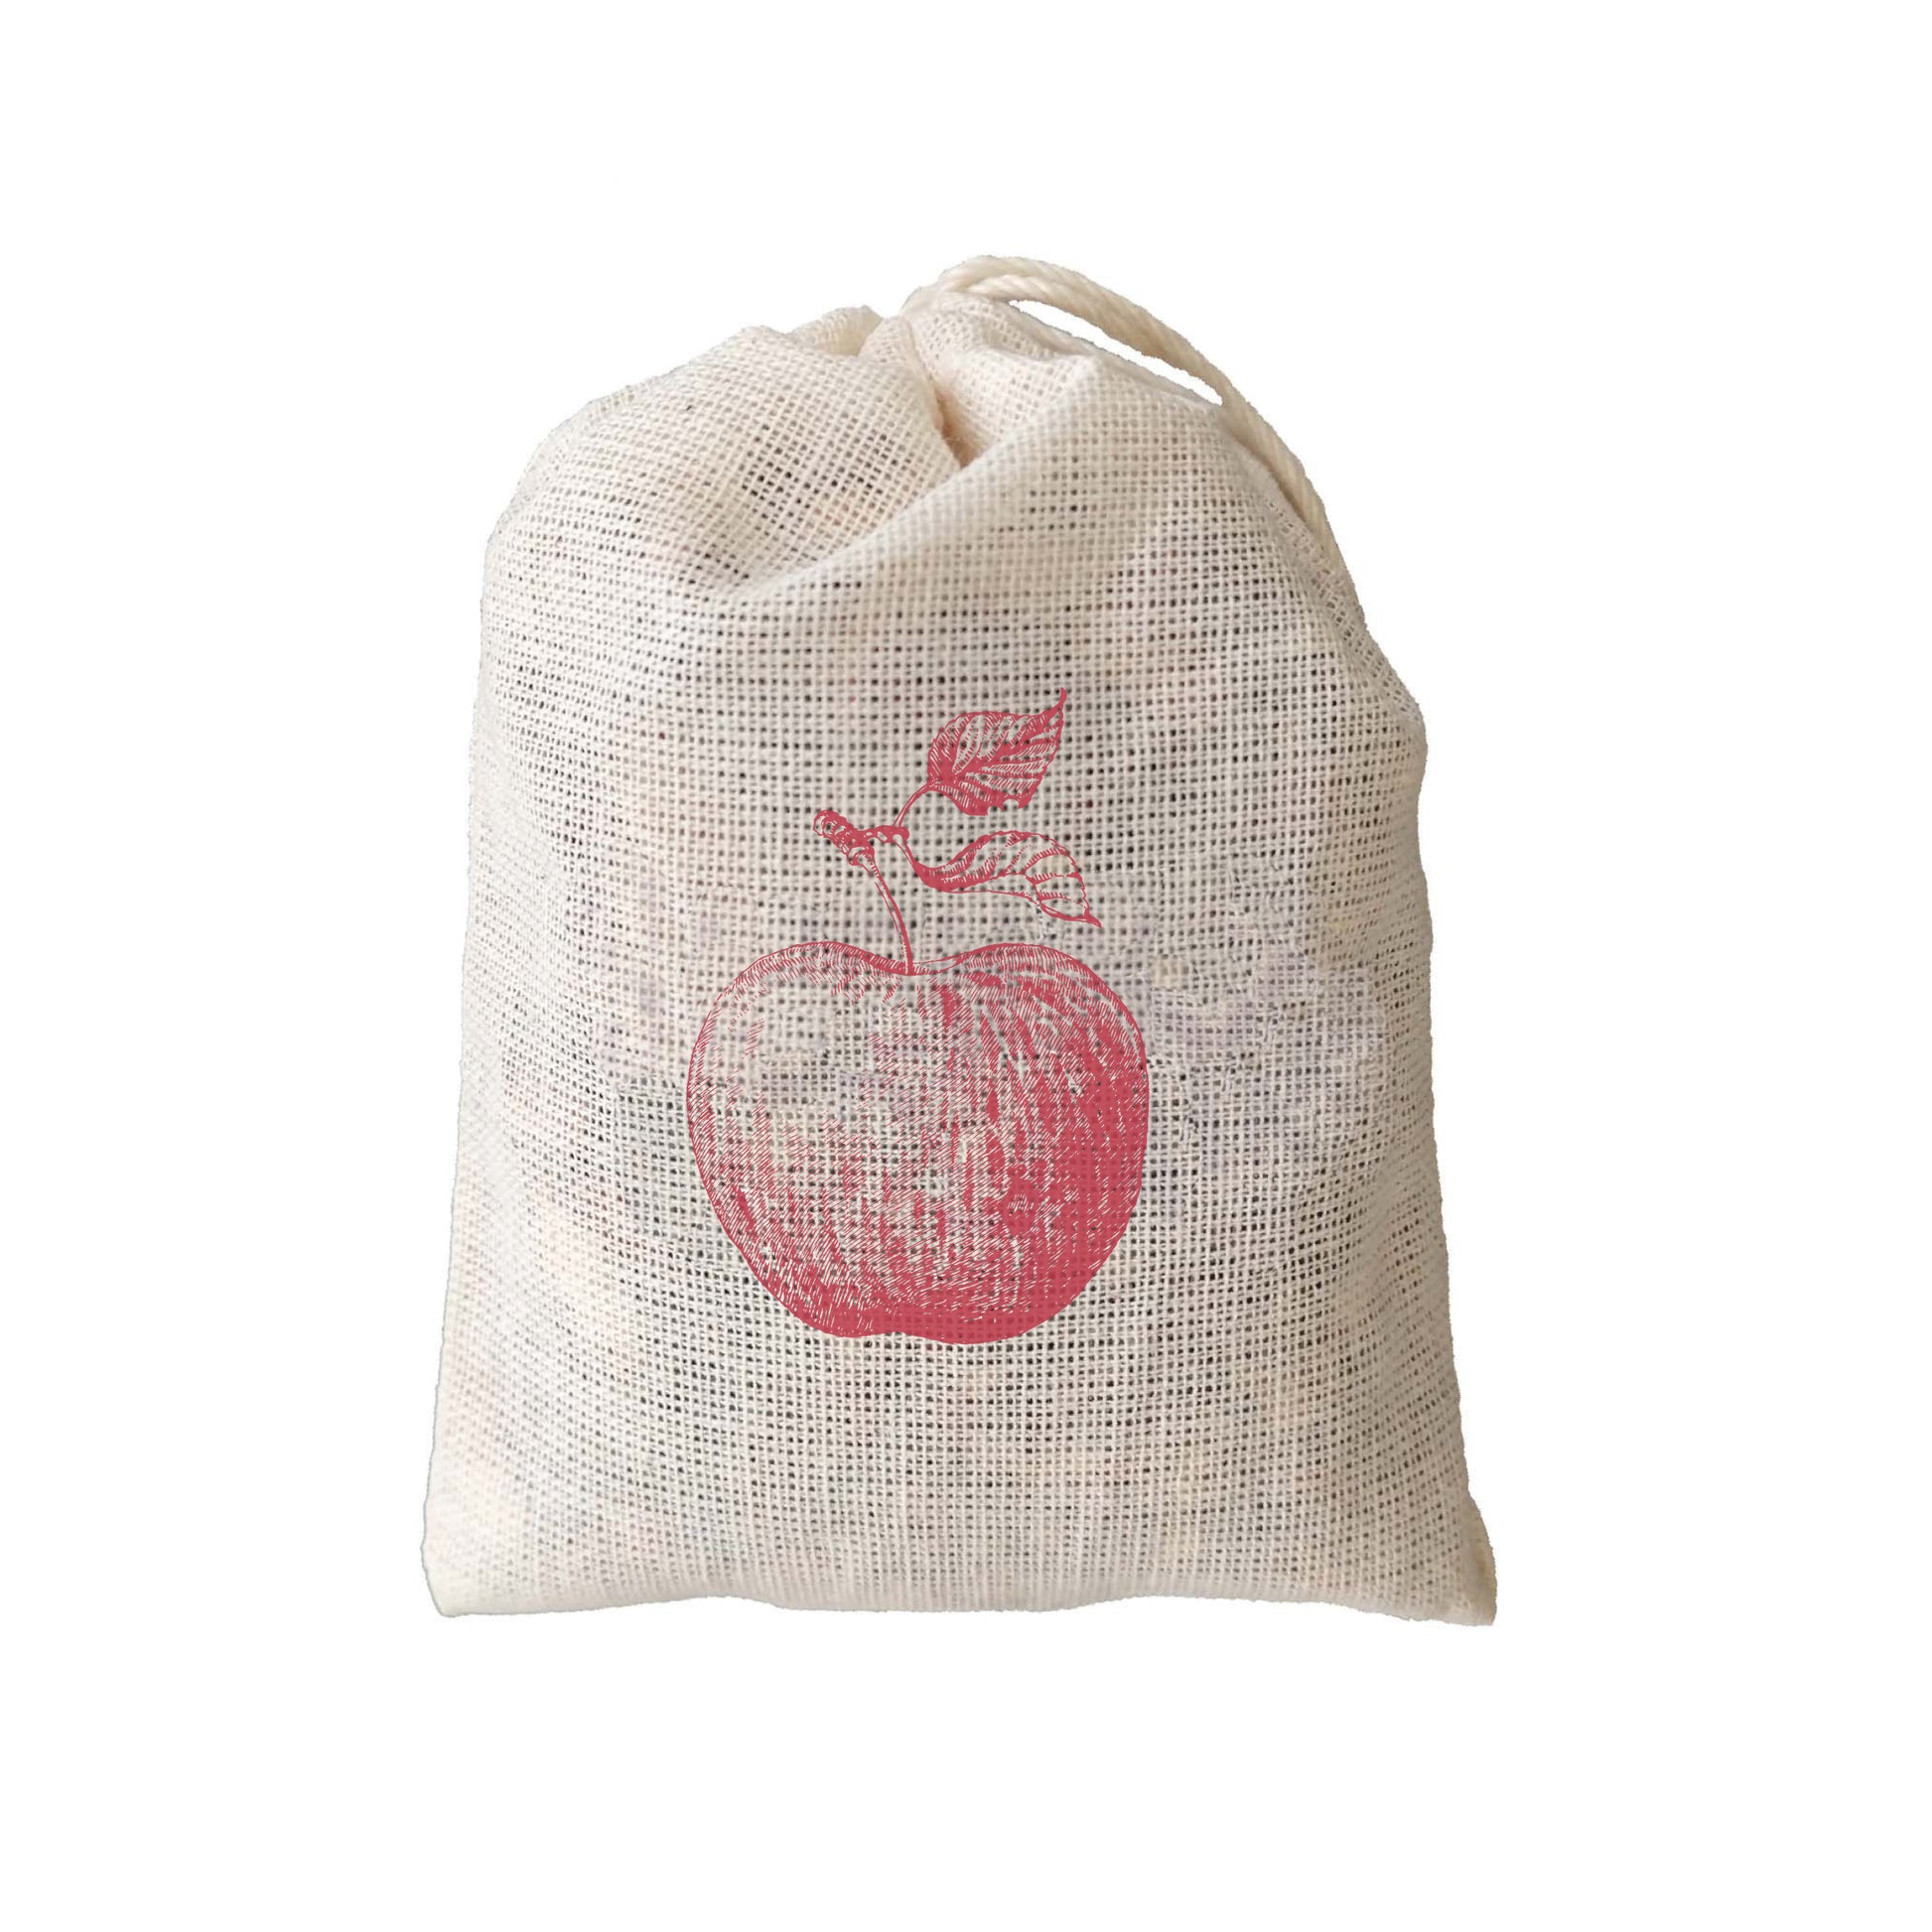 Apple Spice Sachet Printed with Red Apple - 3 Pack for Kitchen, Drawers and Pantry - Idea Chíc